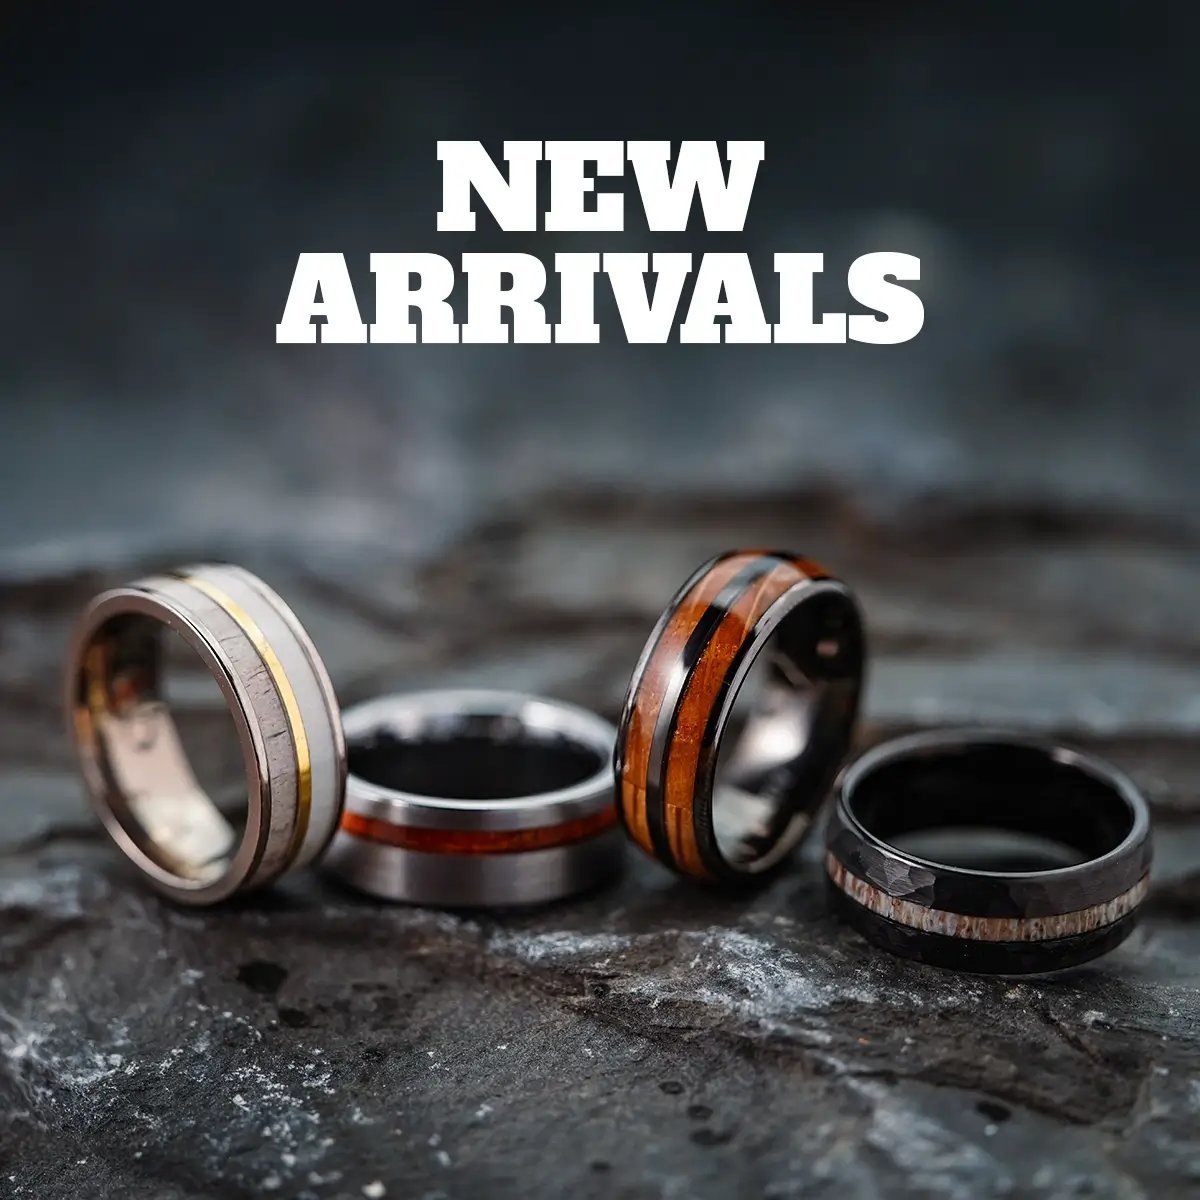 New Arrivals - Manly Bands